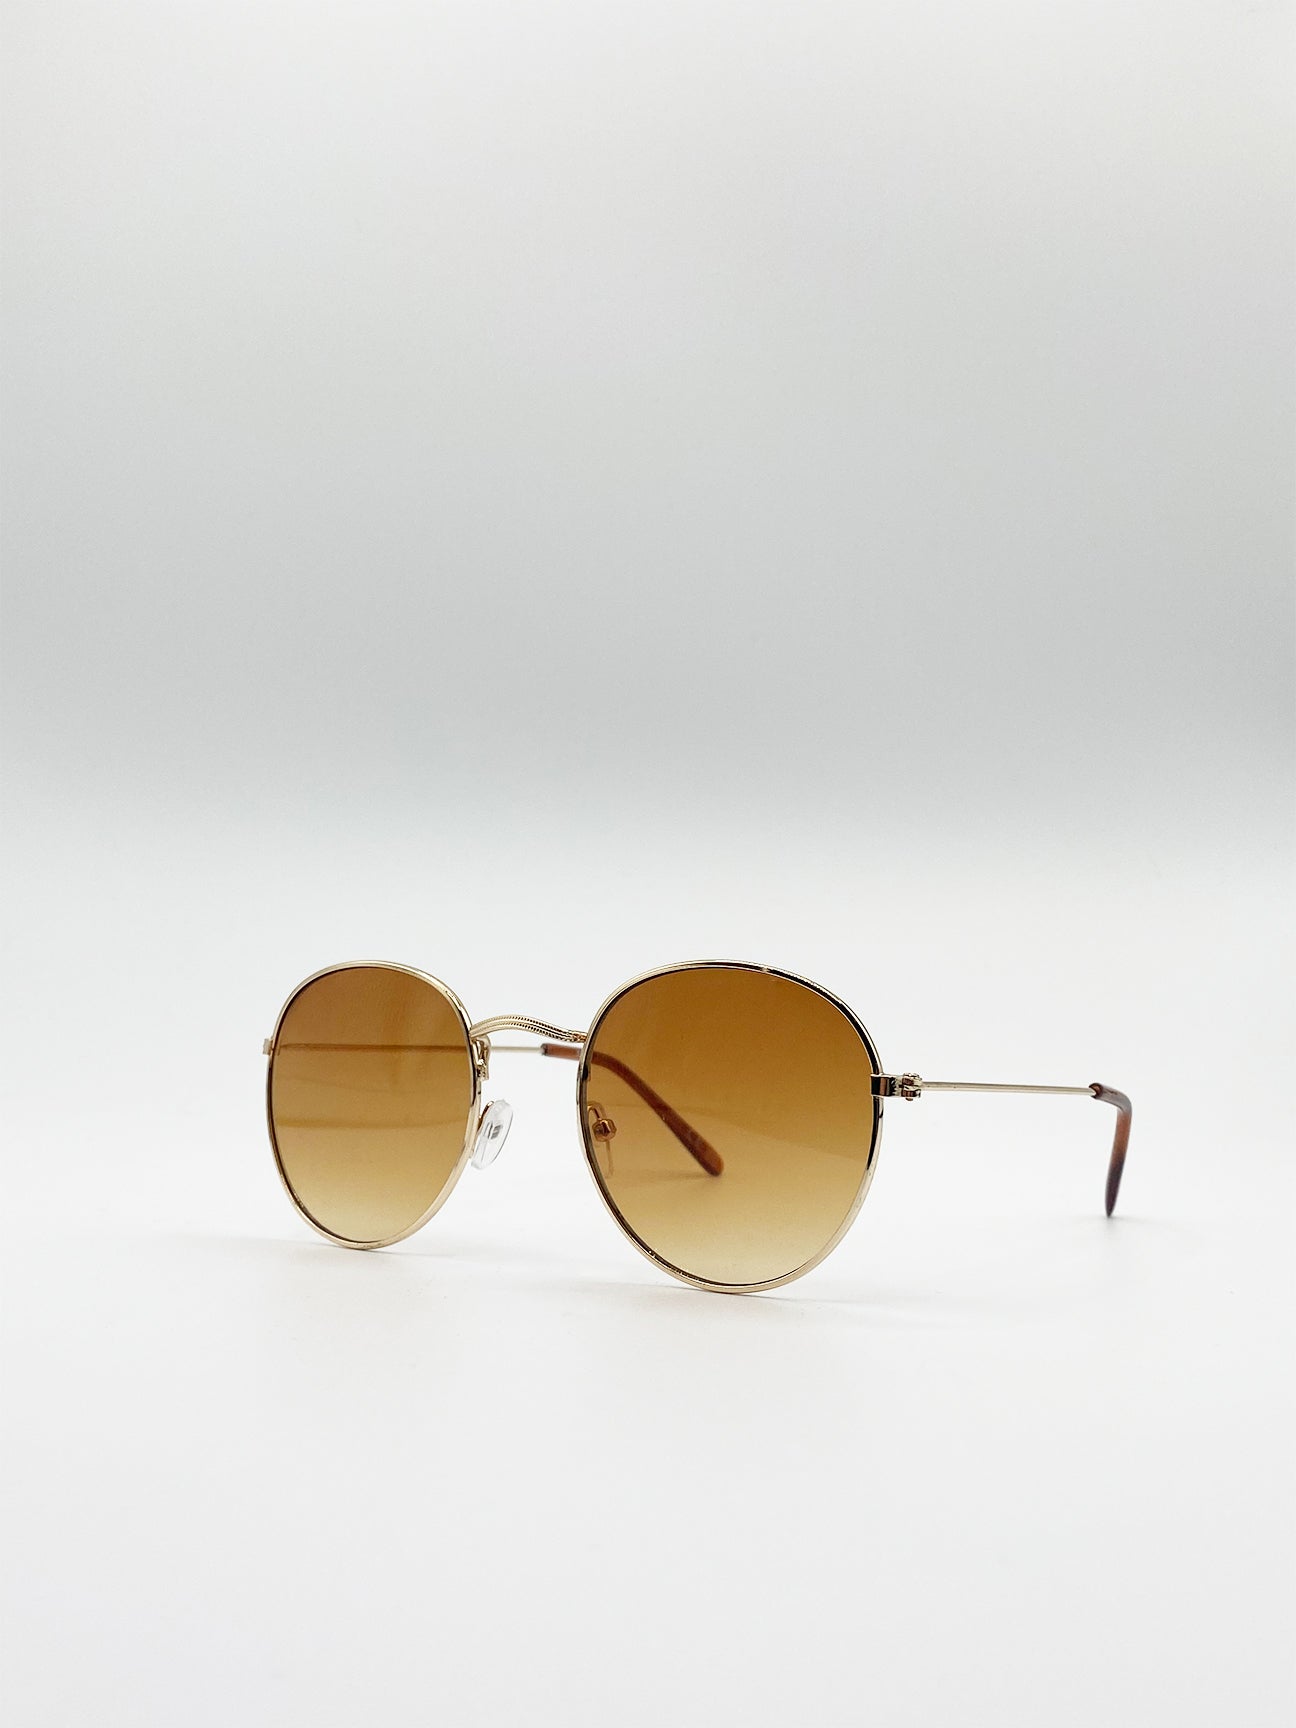 Gold Round Sunglasses with Brown Grad Lenses